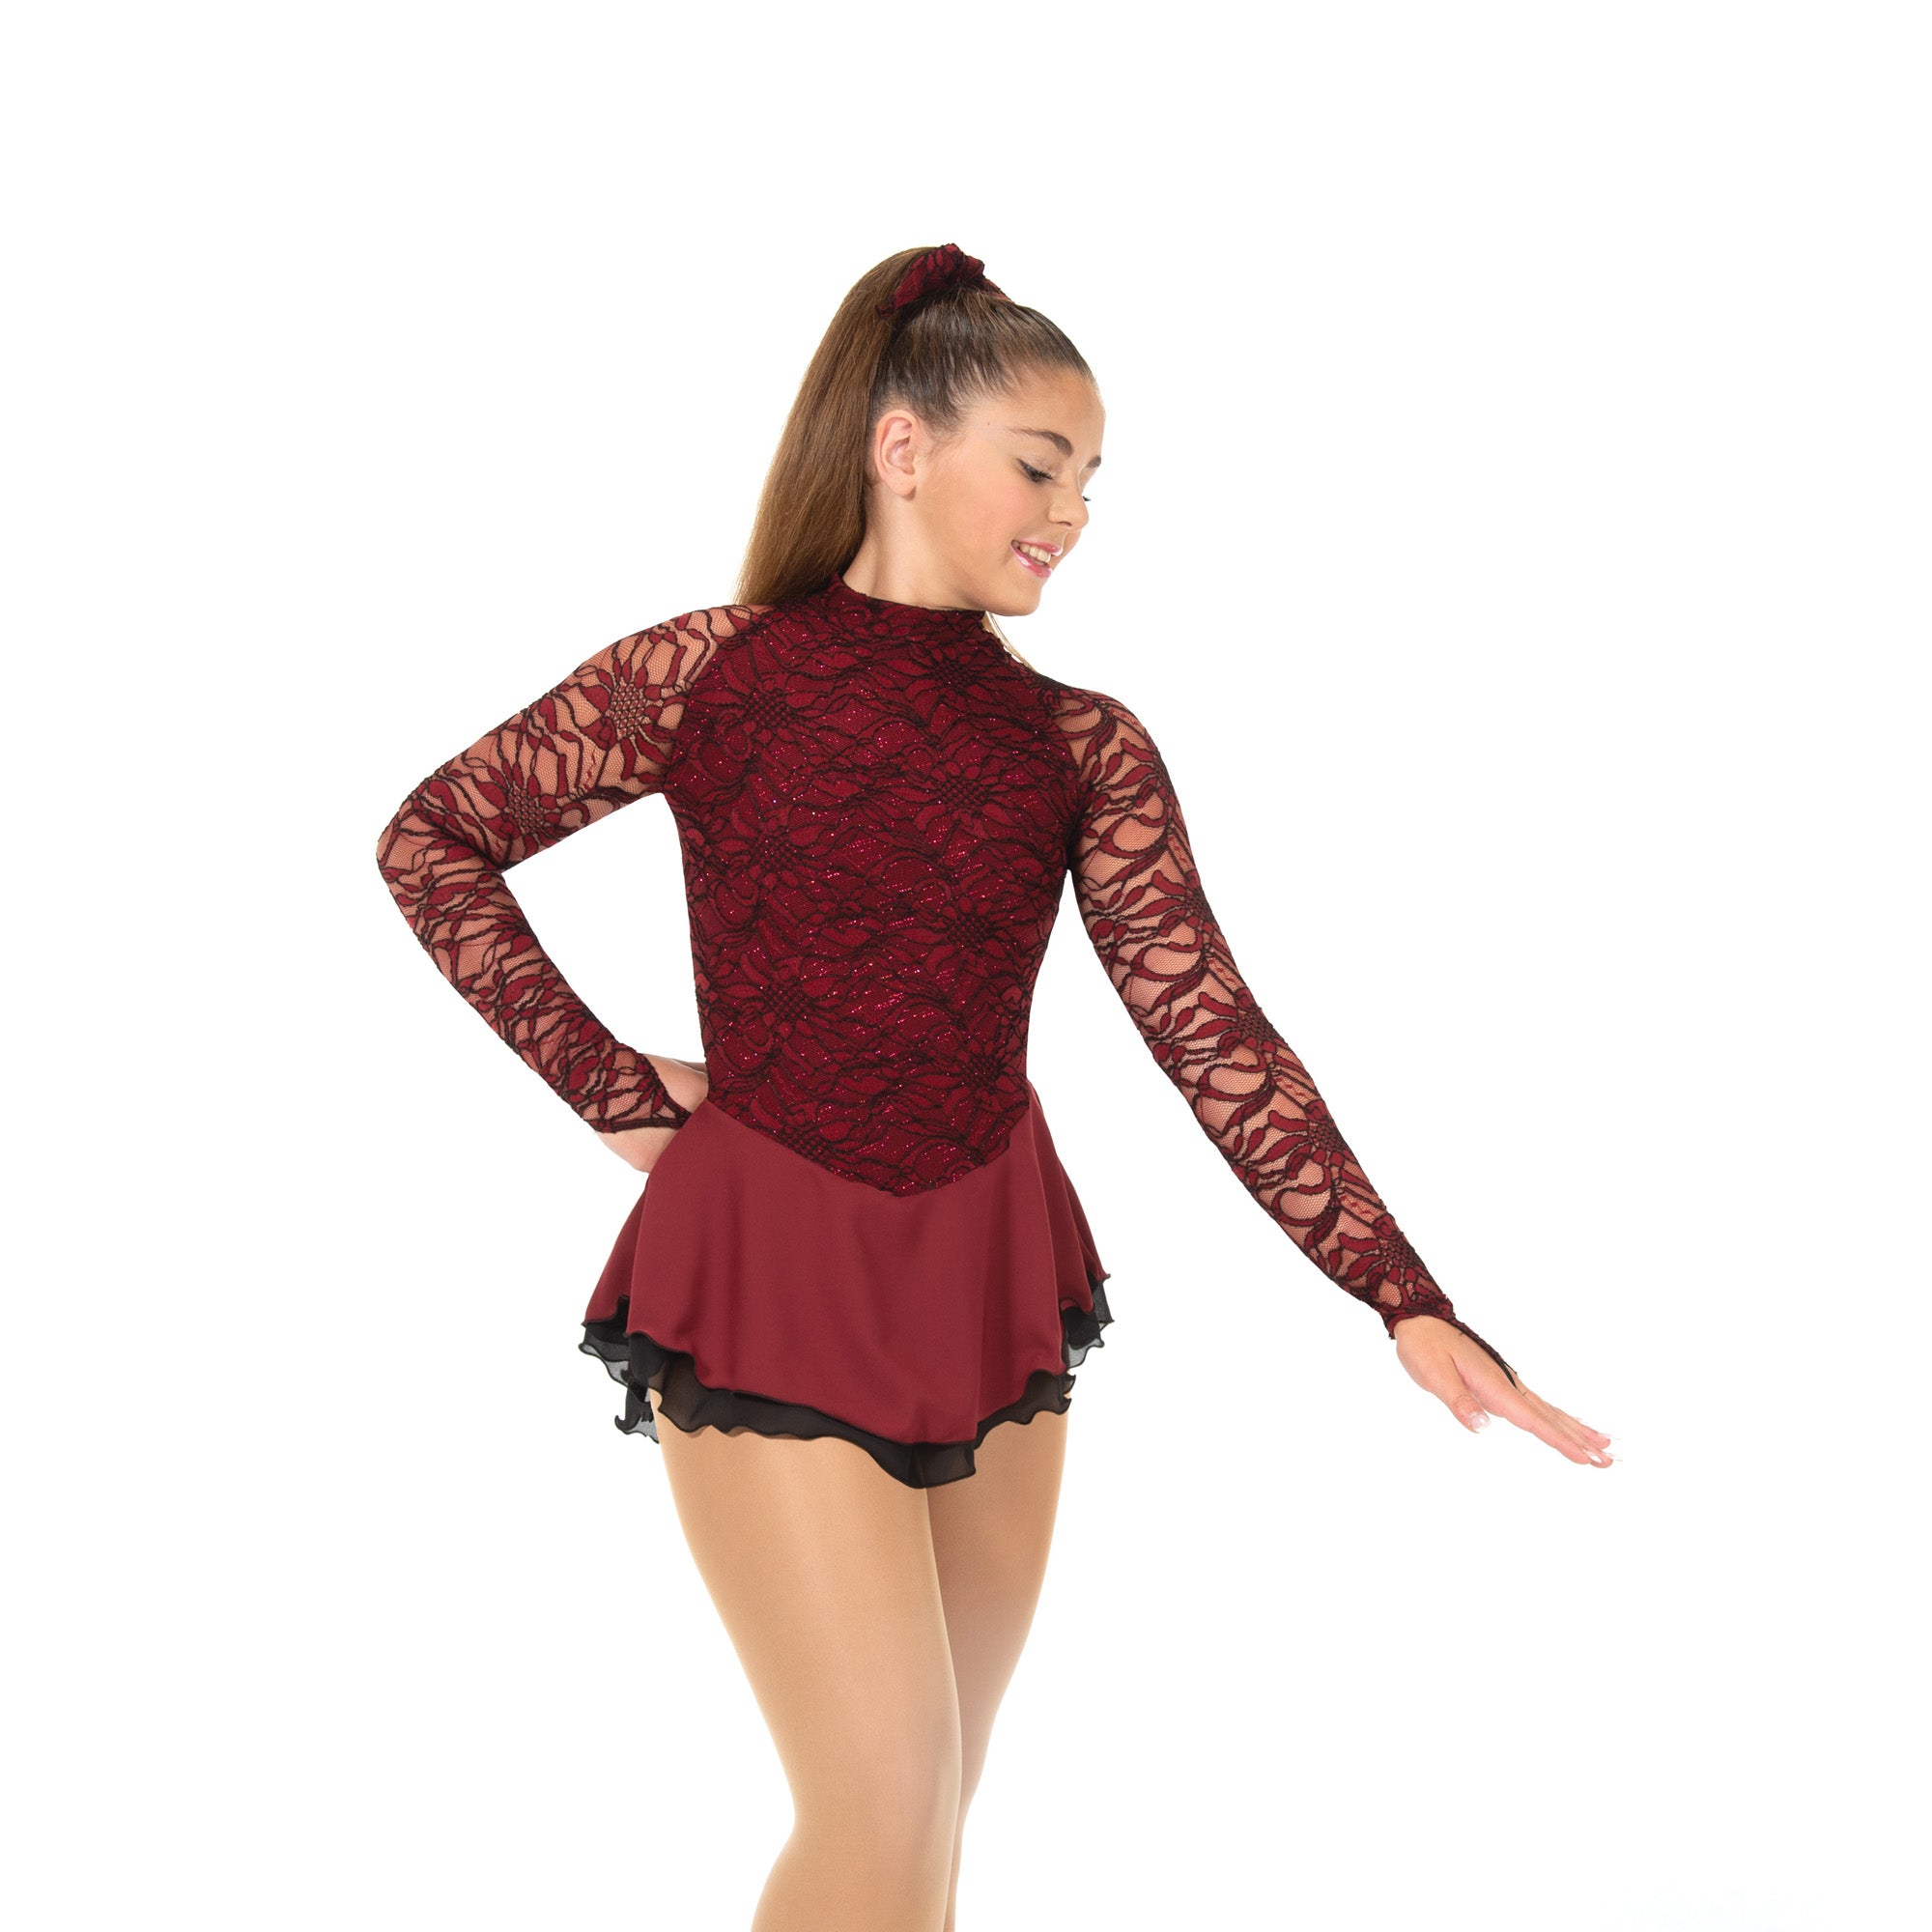 44 Lace Beaujolais Skating Dress in Deep Wine by Jerry's